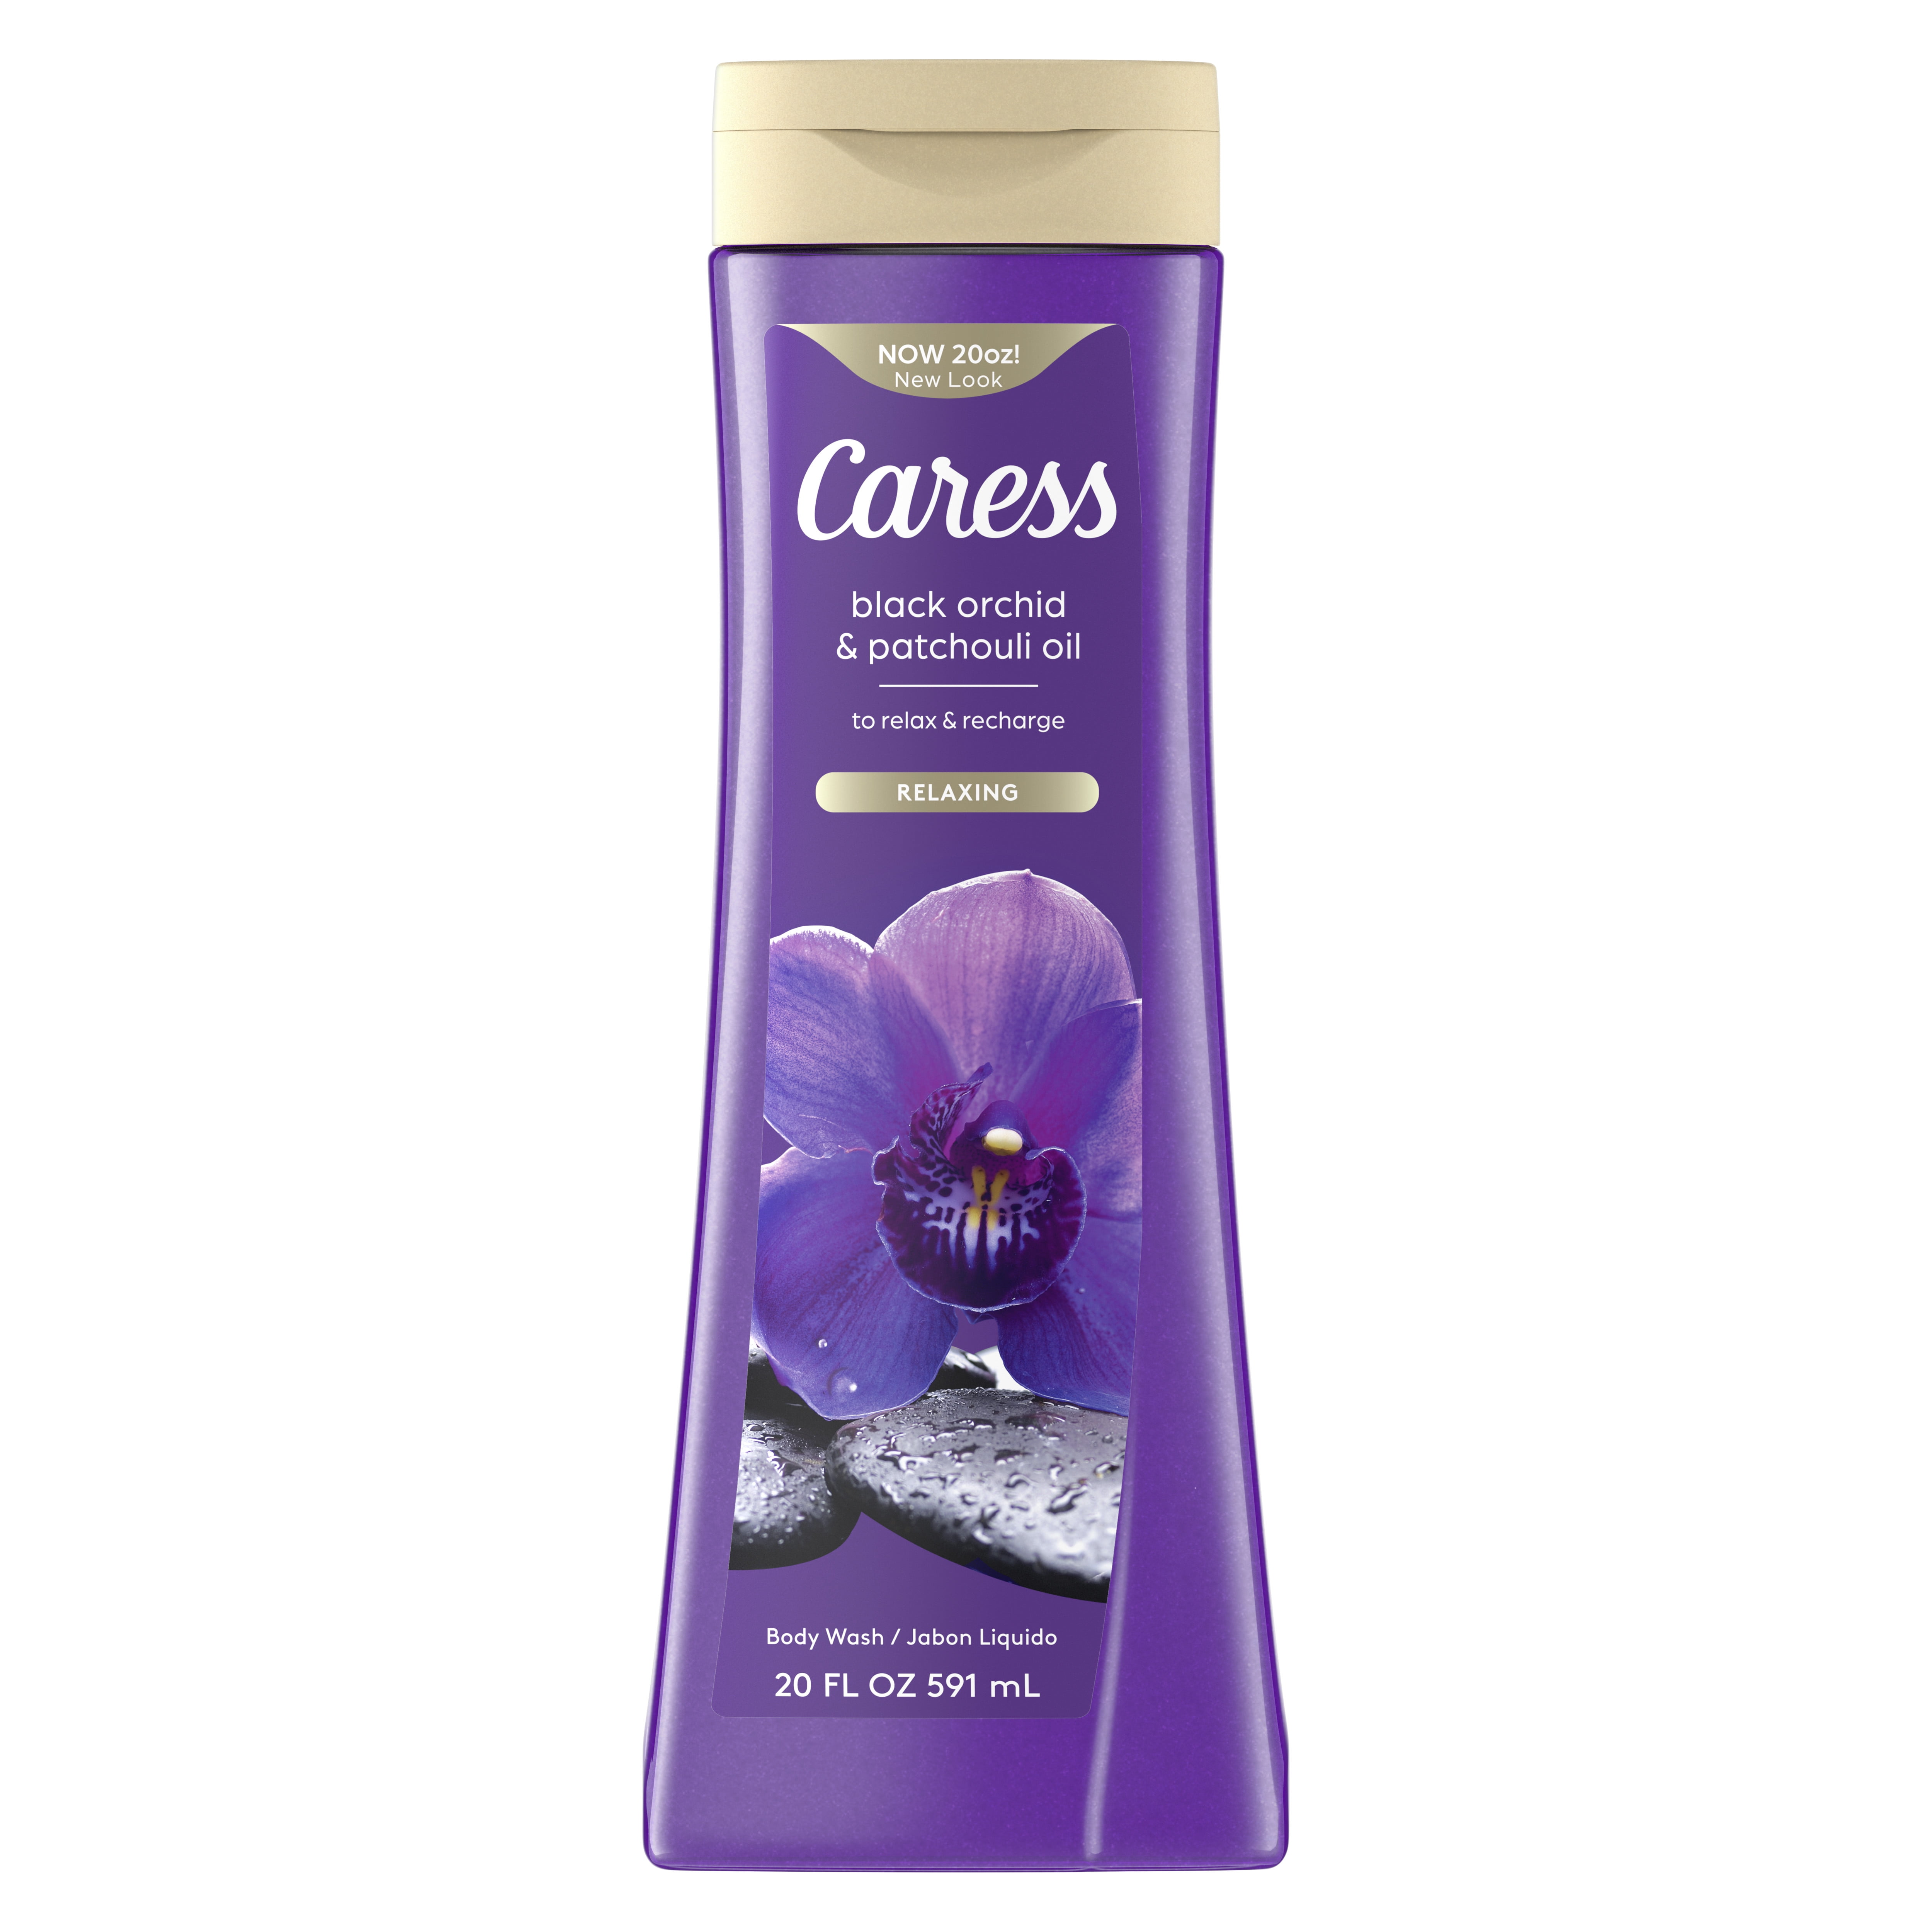 Caress Body Wash To Relax and Recharge Black Orchid & Patchouli Oil, 20 fl oz